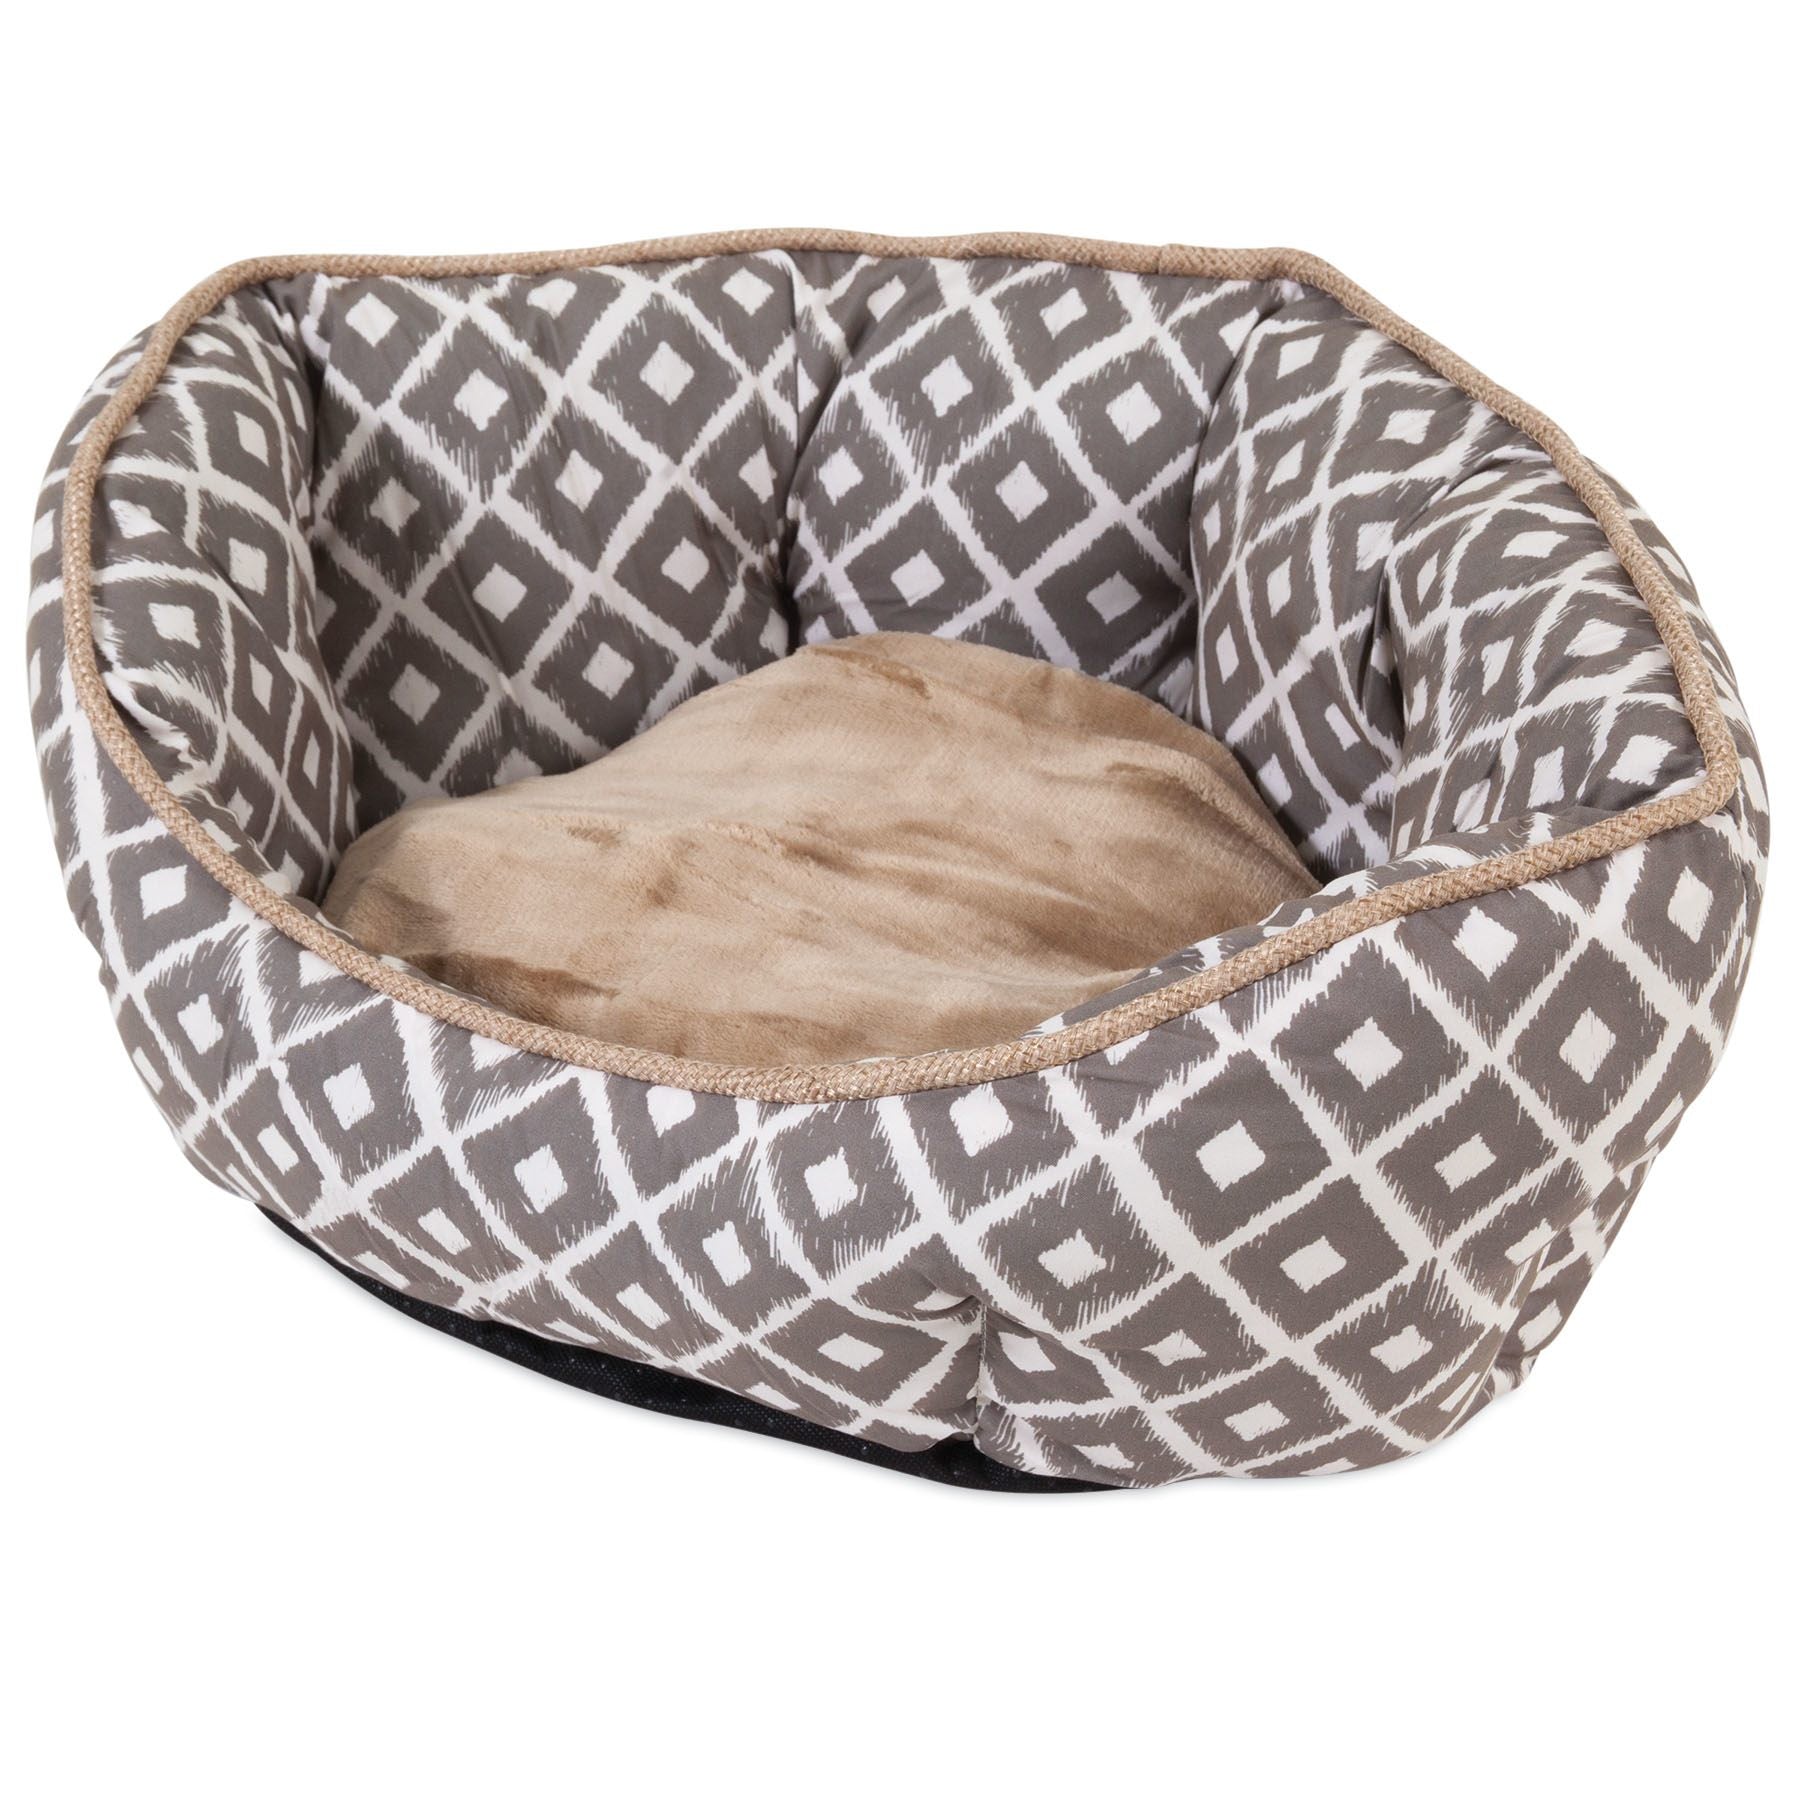 SnooZZy IKAT Clamshell Bed - Gray